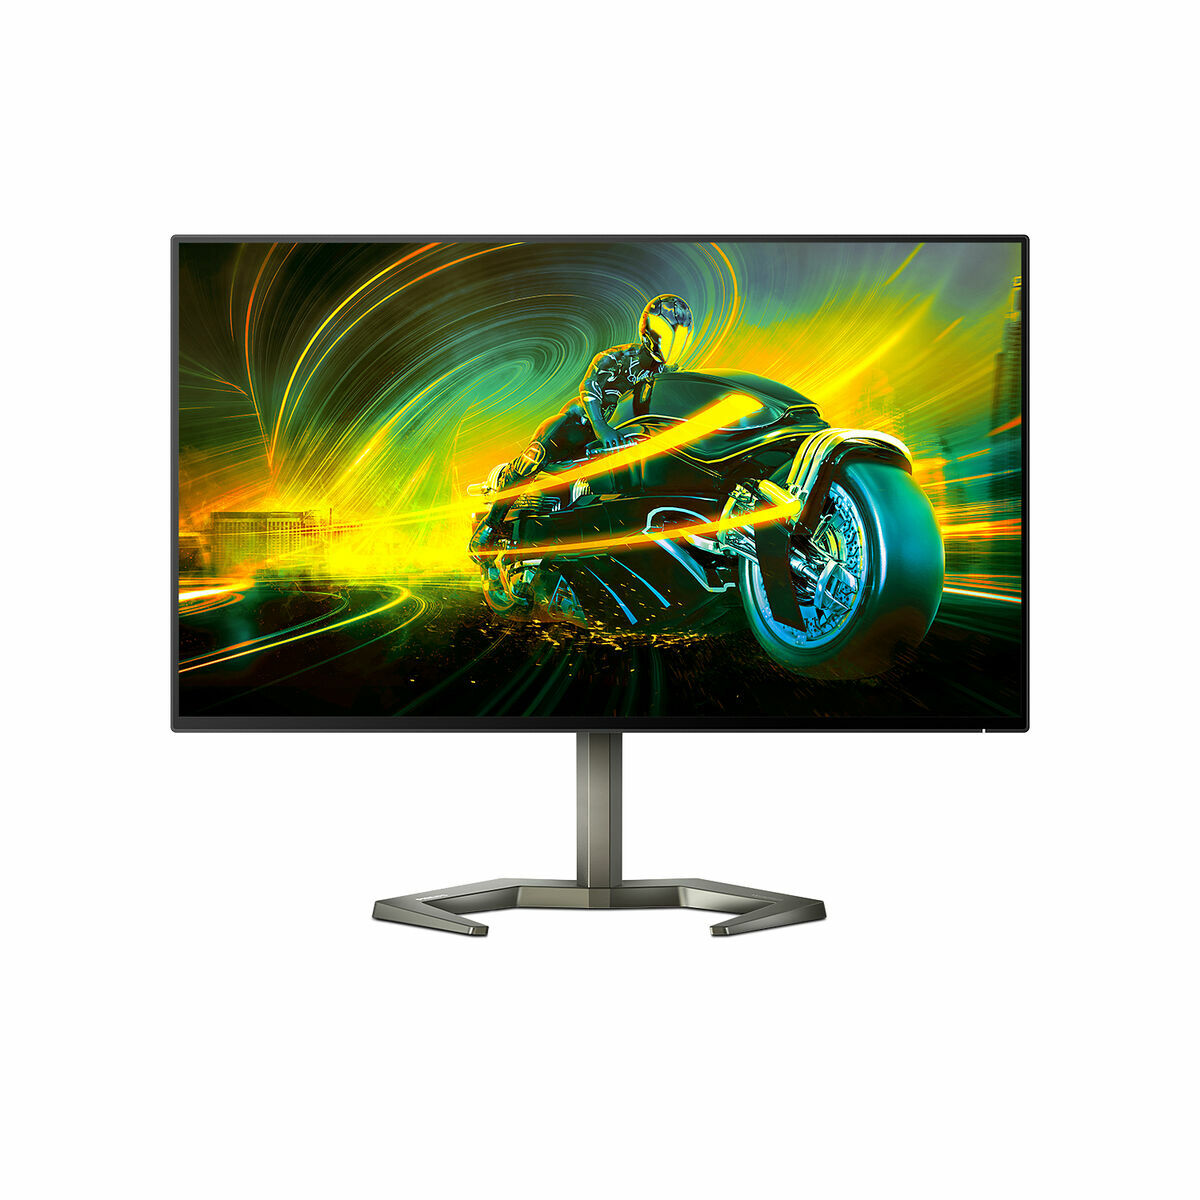 Monitor Philips 27M1F5500P/00 LED 27" Flicker free, Philips, Computing, monitor-philips-27m1f5500p-00-led-27-flicker-free, Brand_Philips, category-reference-2609, category-reference-2642, category-reference-2644, category-reference-t-19685, computers / peripherals, Condition_NEW, office, Price_600 - 700, Teleworking, RiotNook